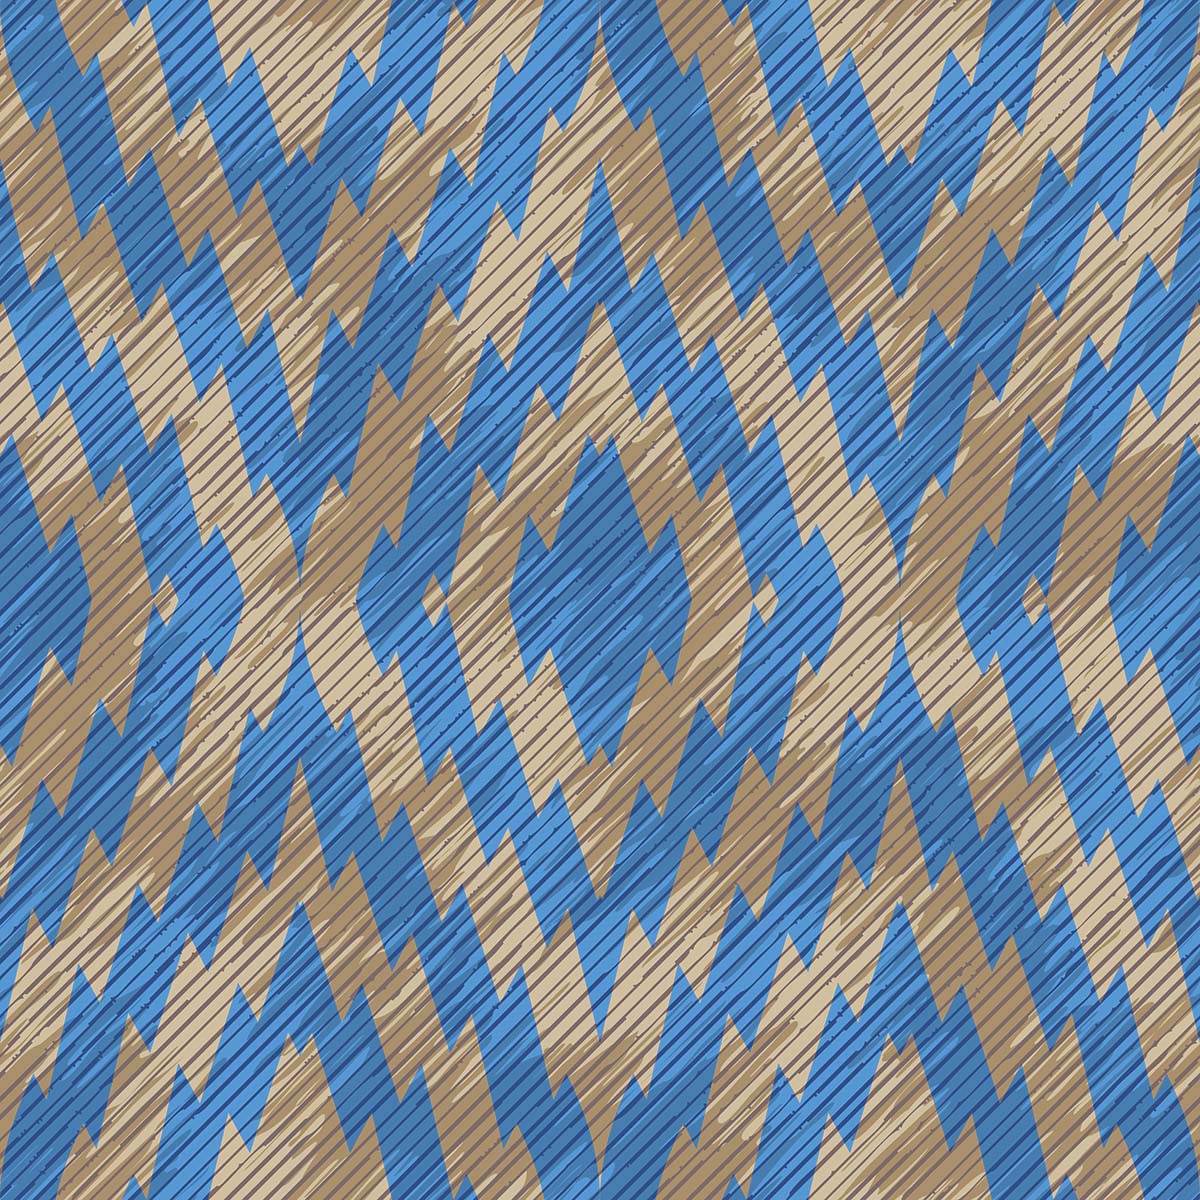 A blue and tan zigzag pattern